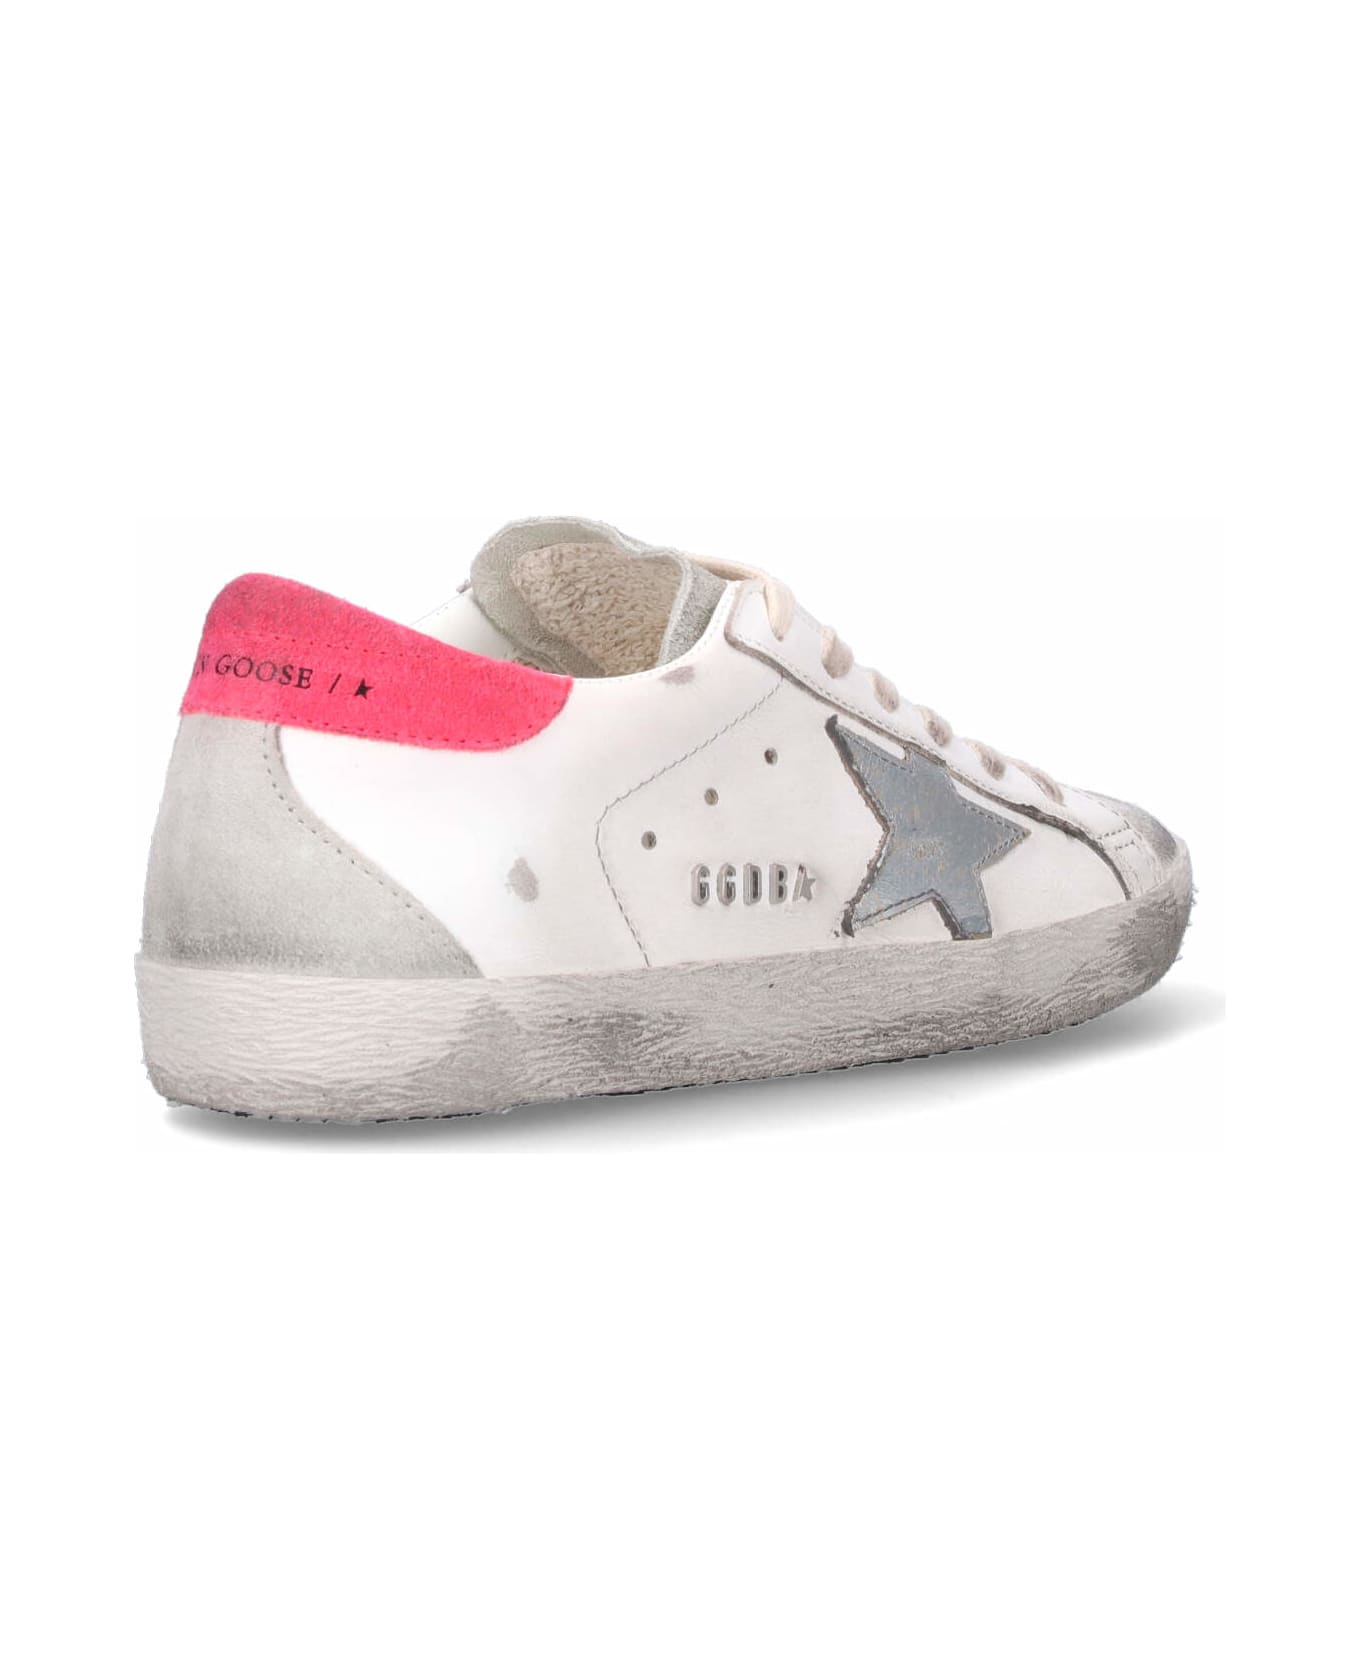 Golden Goose Superstar Classic Sneakers - WHITE/ICE スニーカー